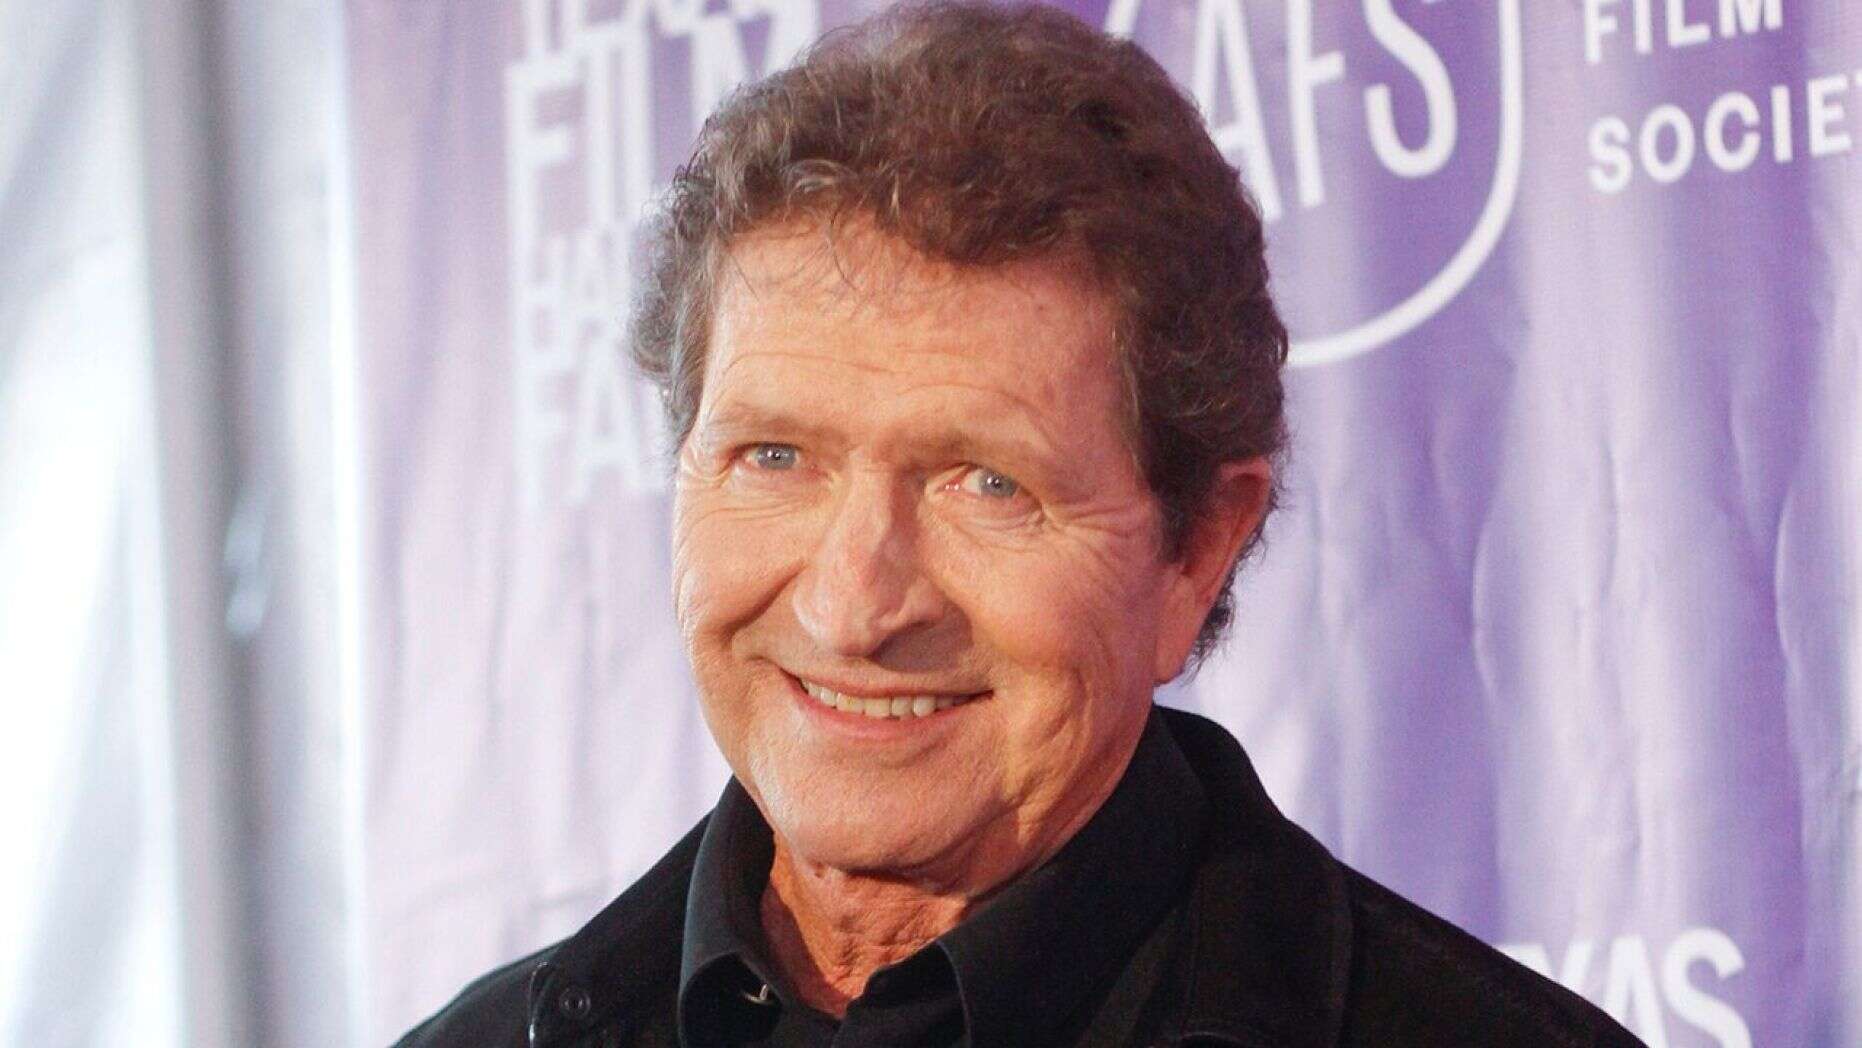 Mac Davis, country singer known for writing popular Elvis Presley hits, dead at 78